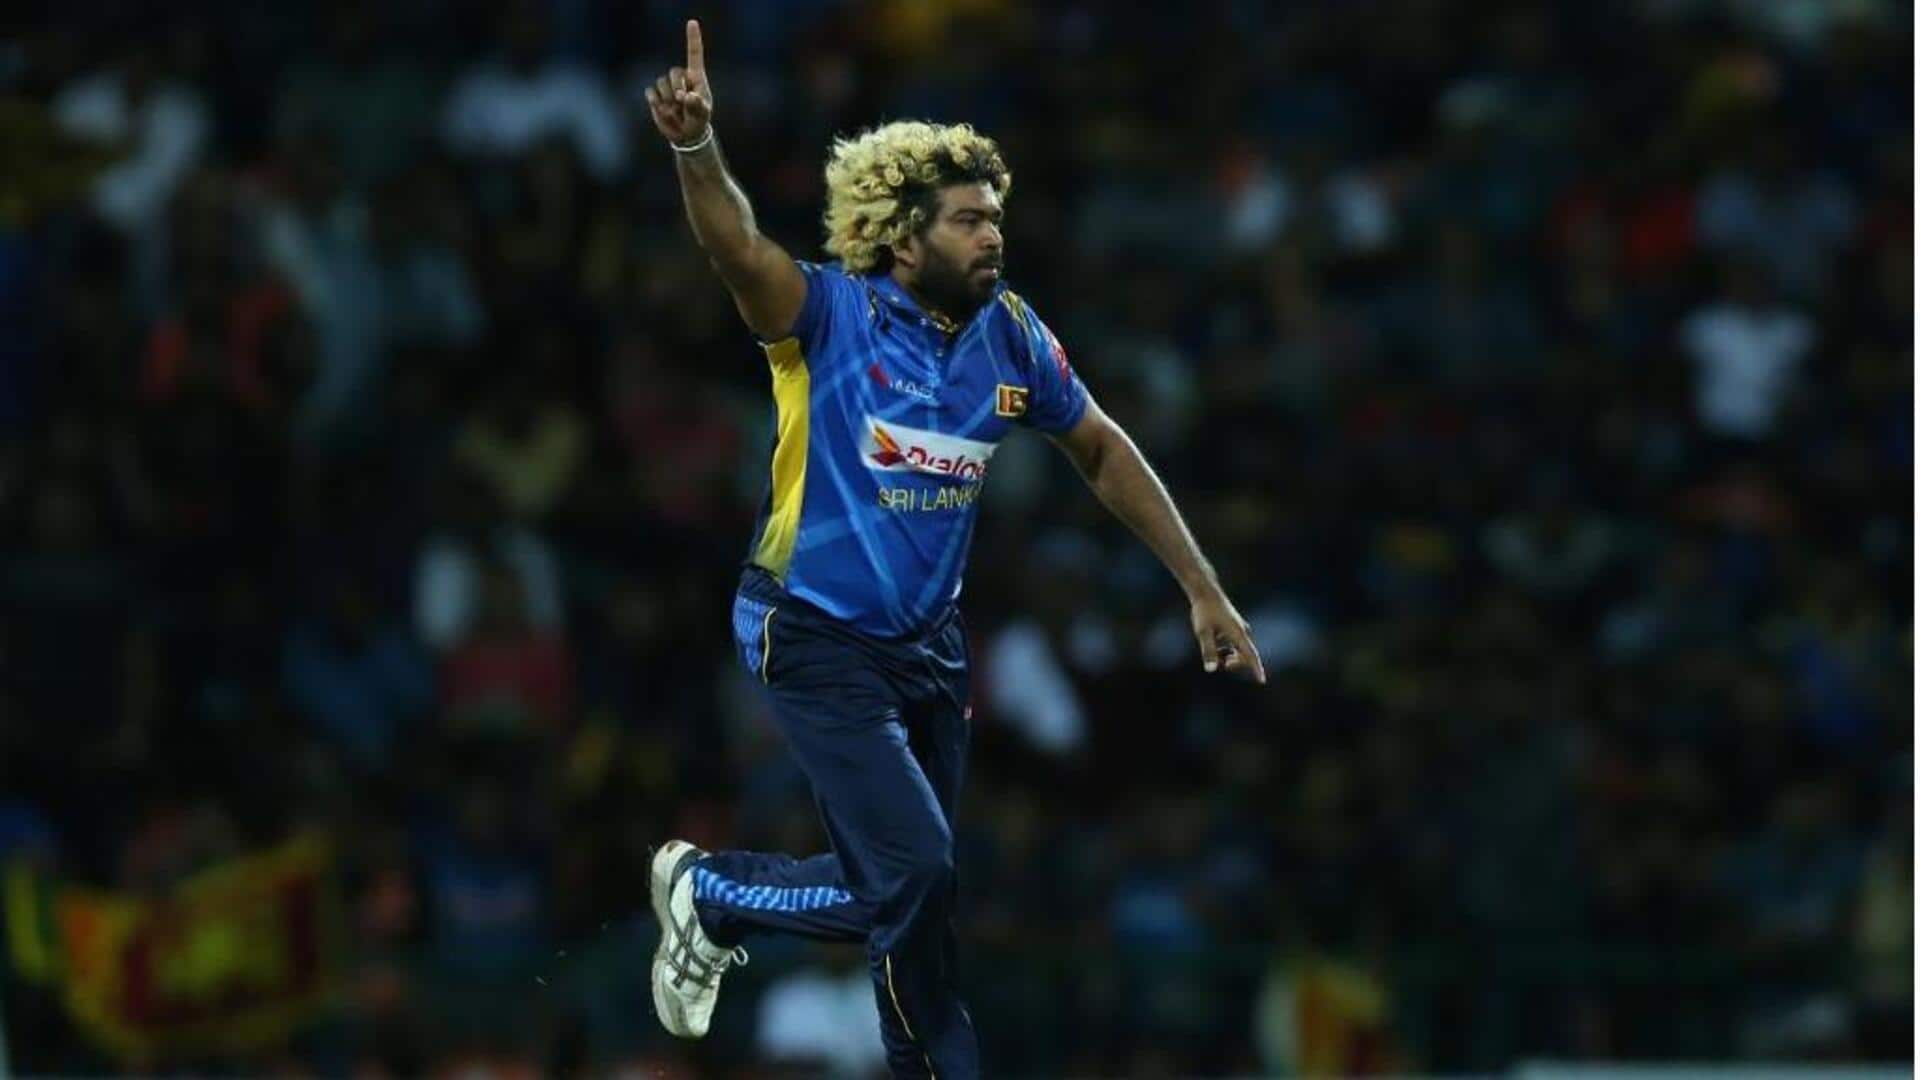 T20 World Cup: Who has taken most wickets for SL?